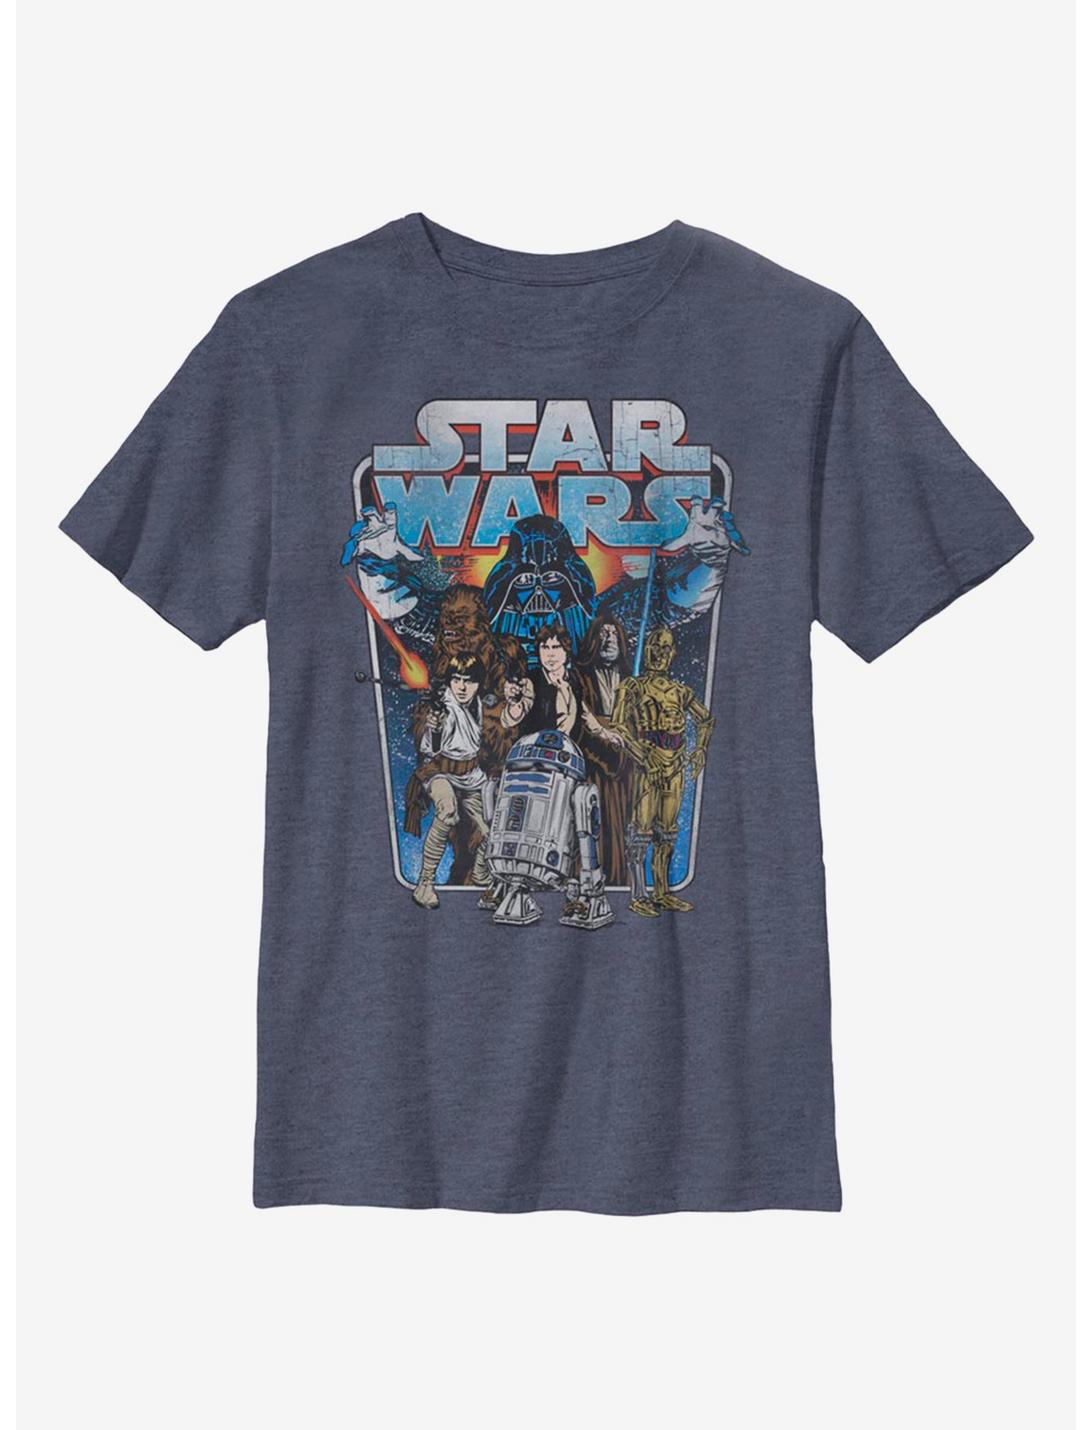 Star Wars Classic Battle Youth T-Shirt, NAVY HTR, hi-res